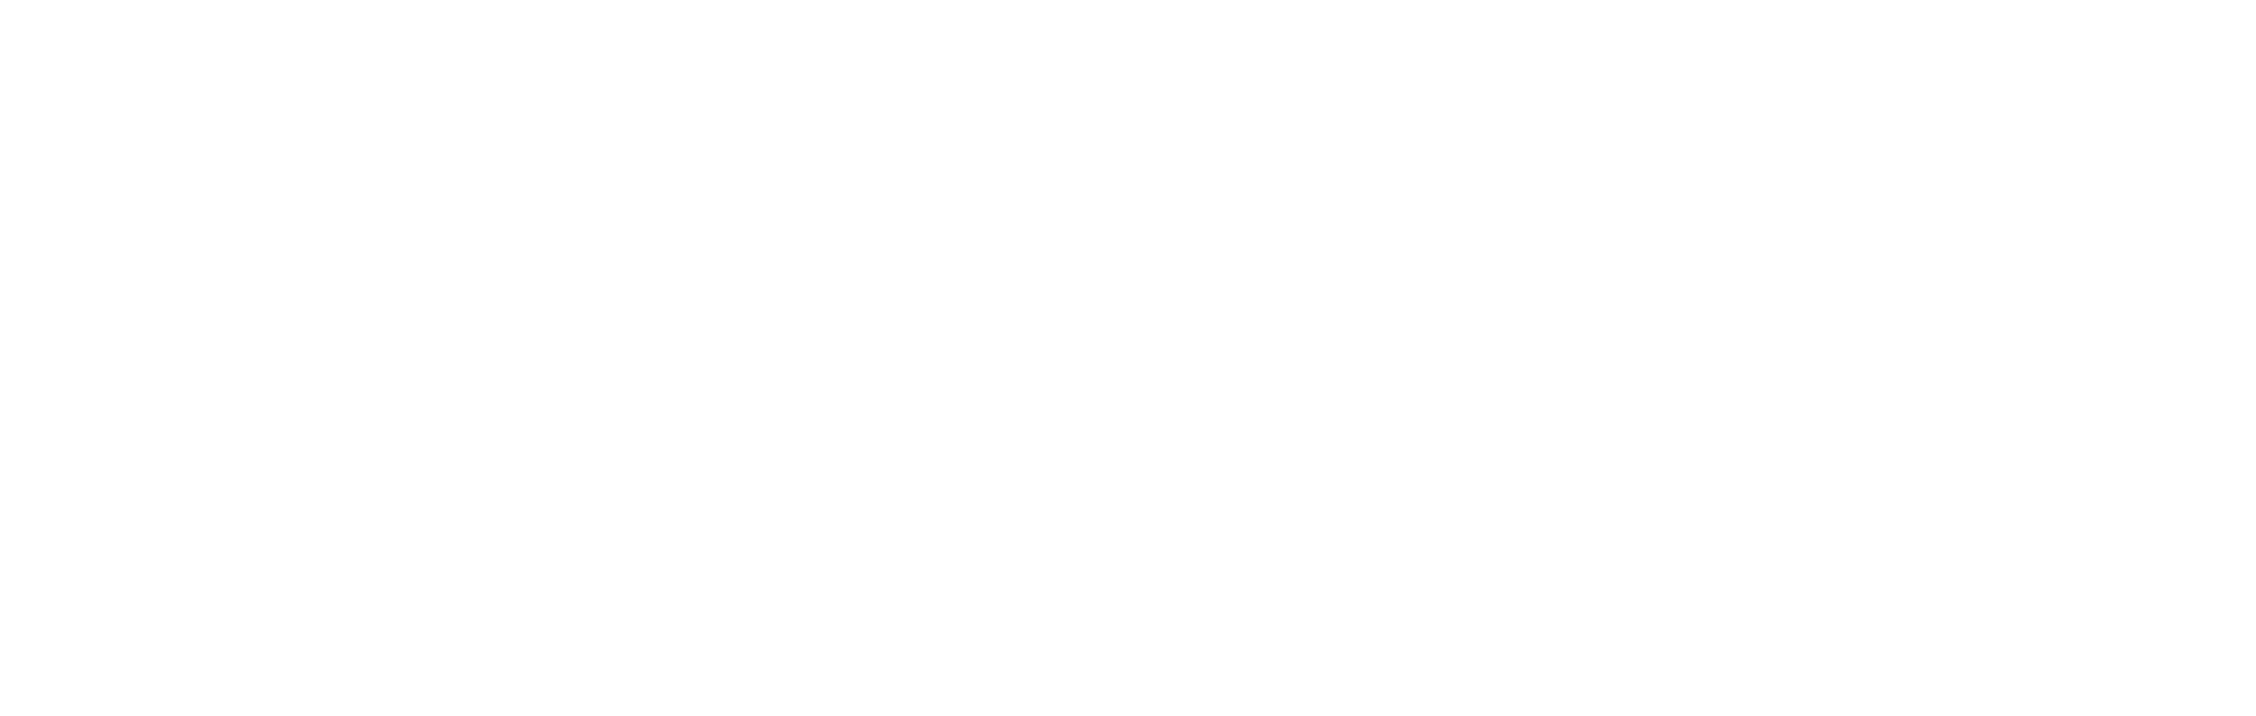 Tan World Logo - Proud Supporter Resources and Logo | World Vision